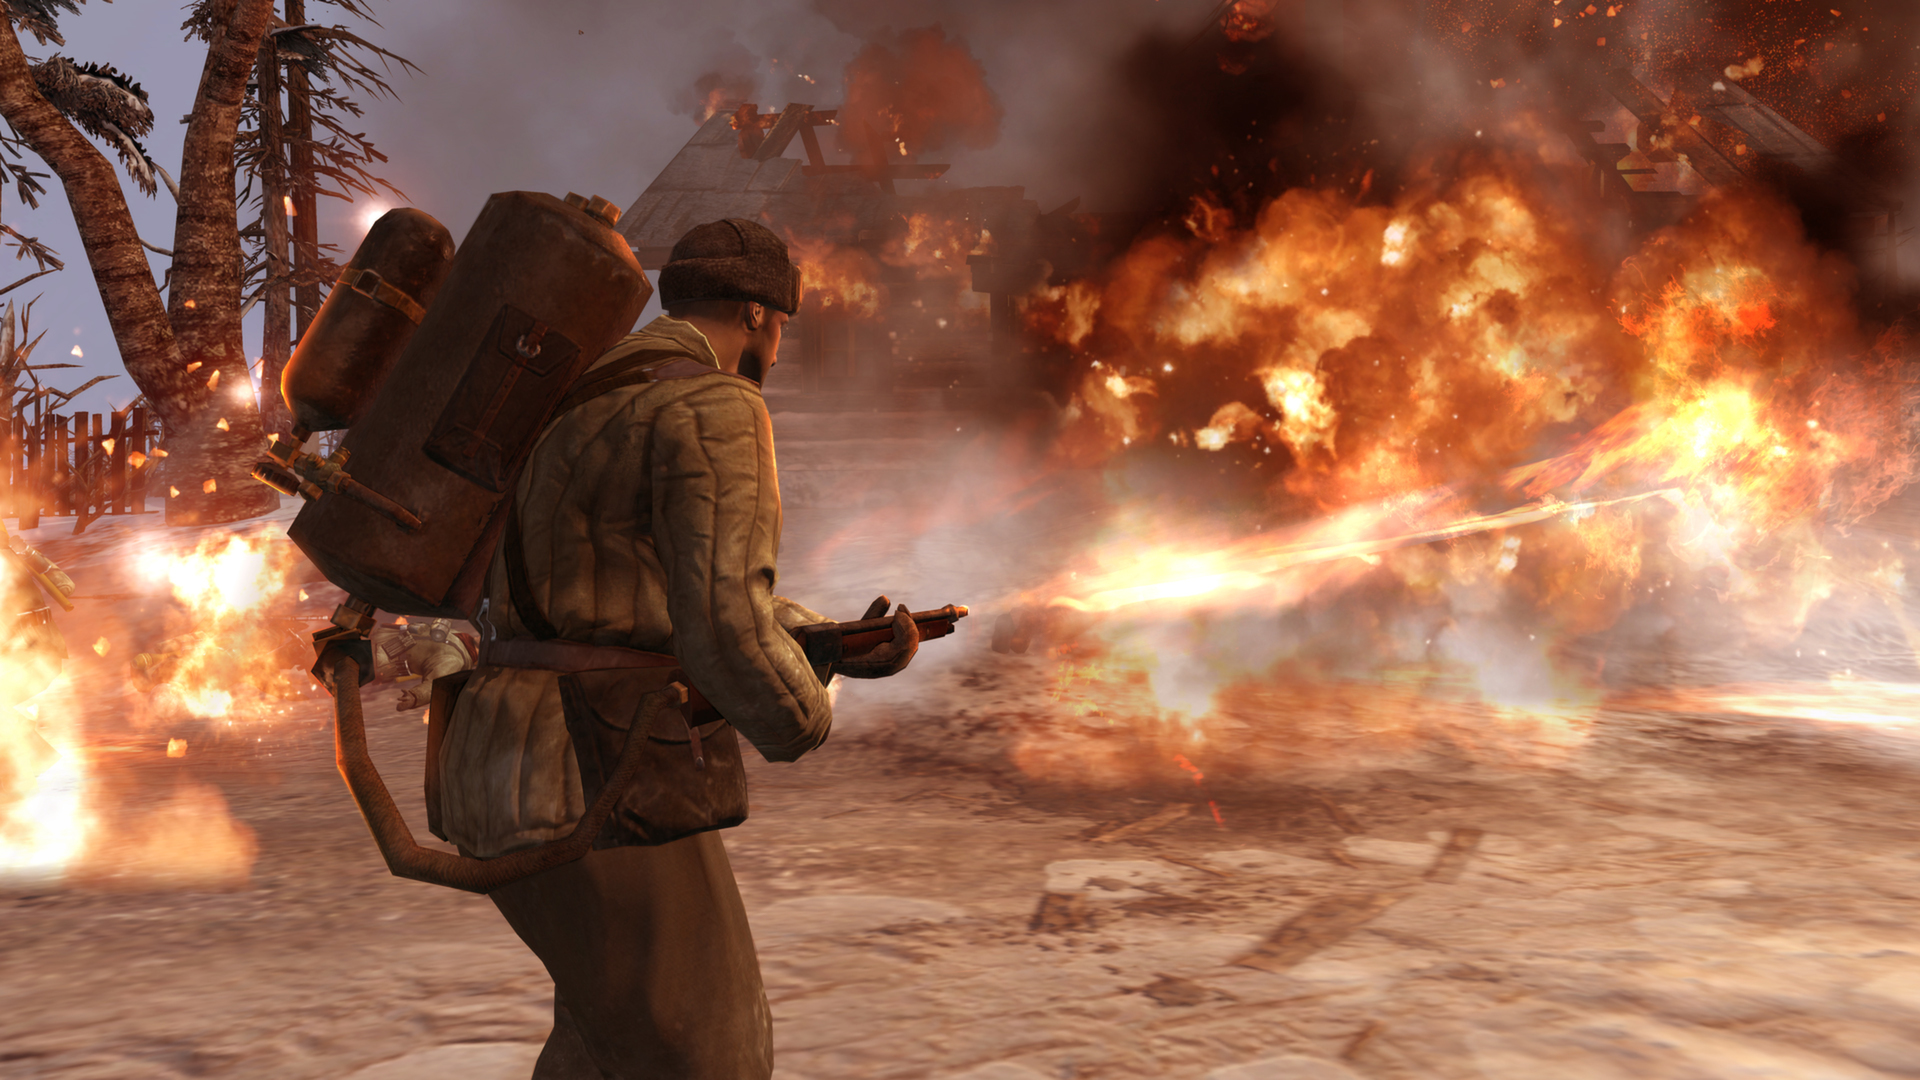 games like company of heroes 2 download free